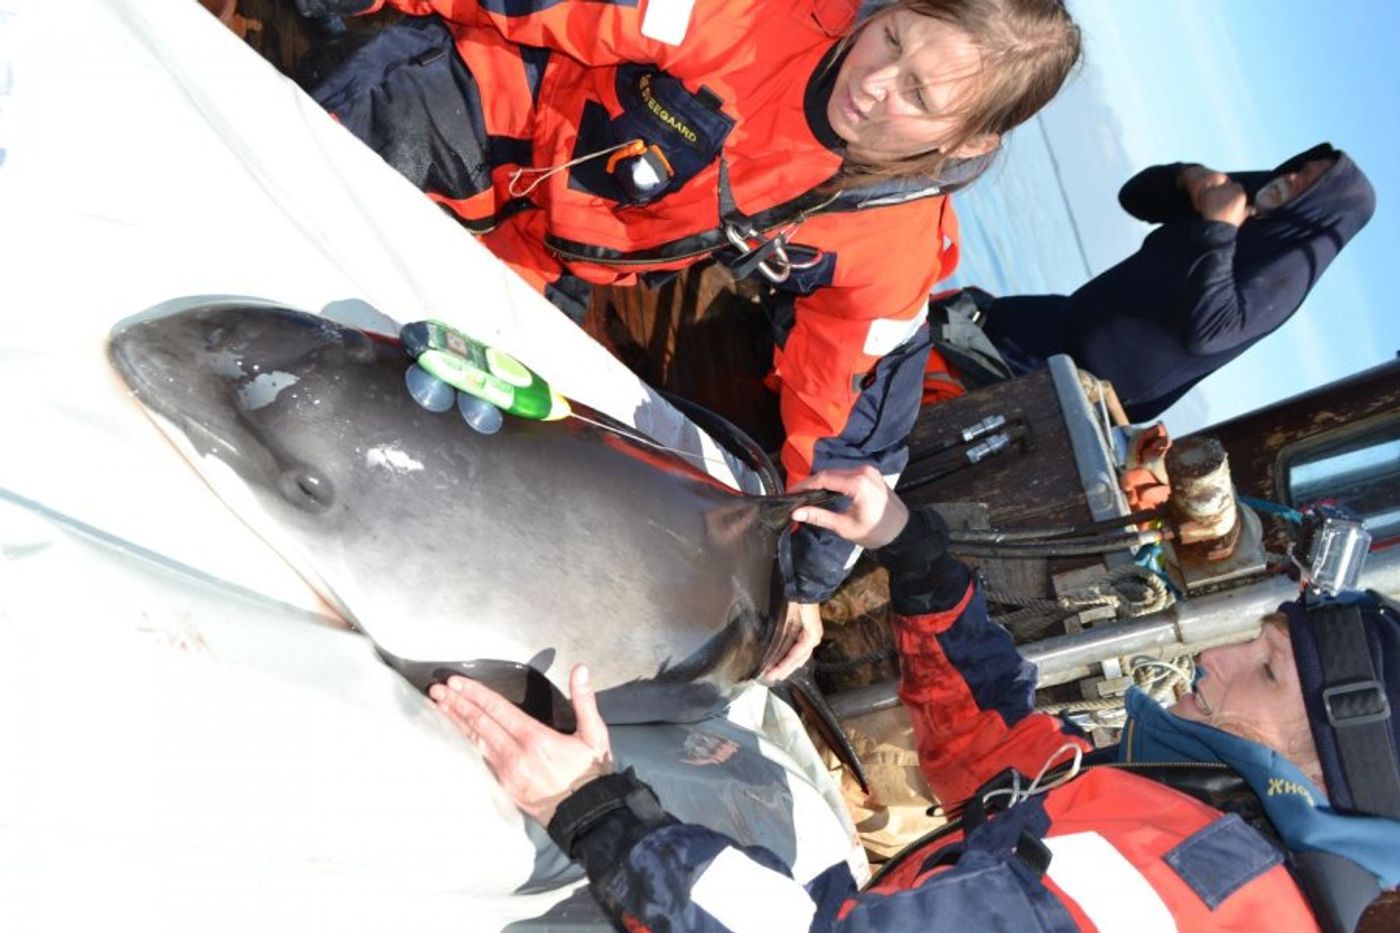 Researchers tagged seven porpoises to learn how ship noise impacts their communication and feeding habits.